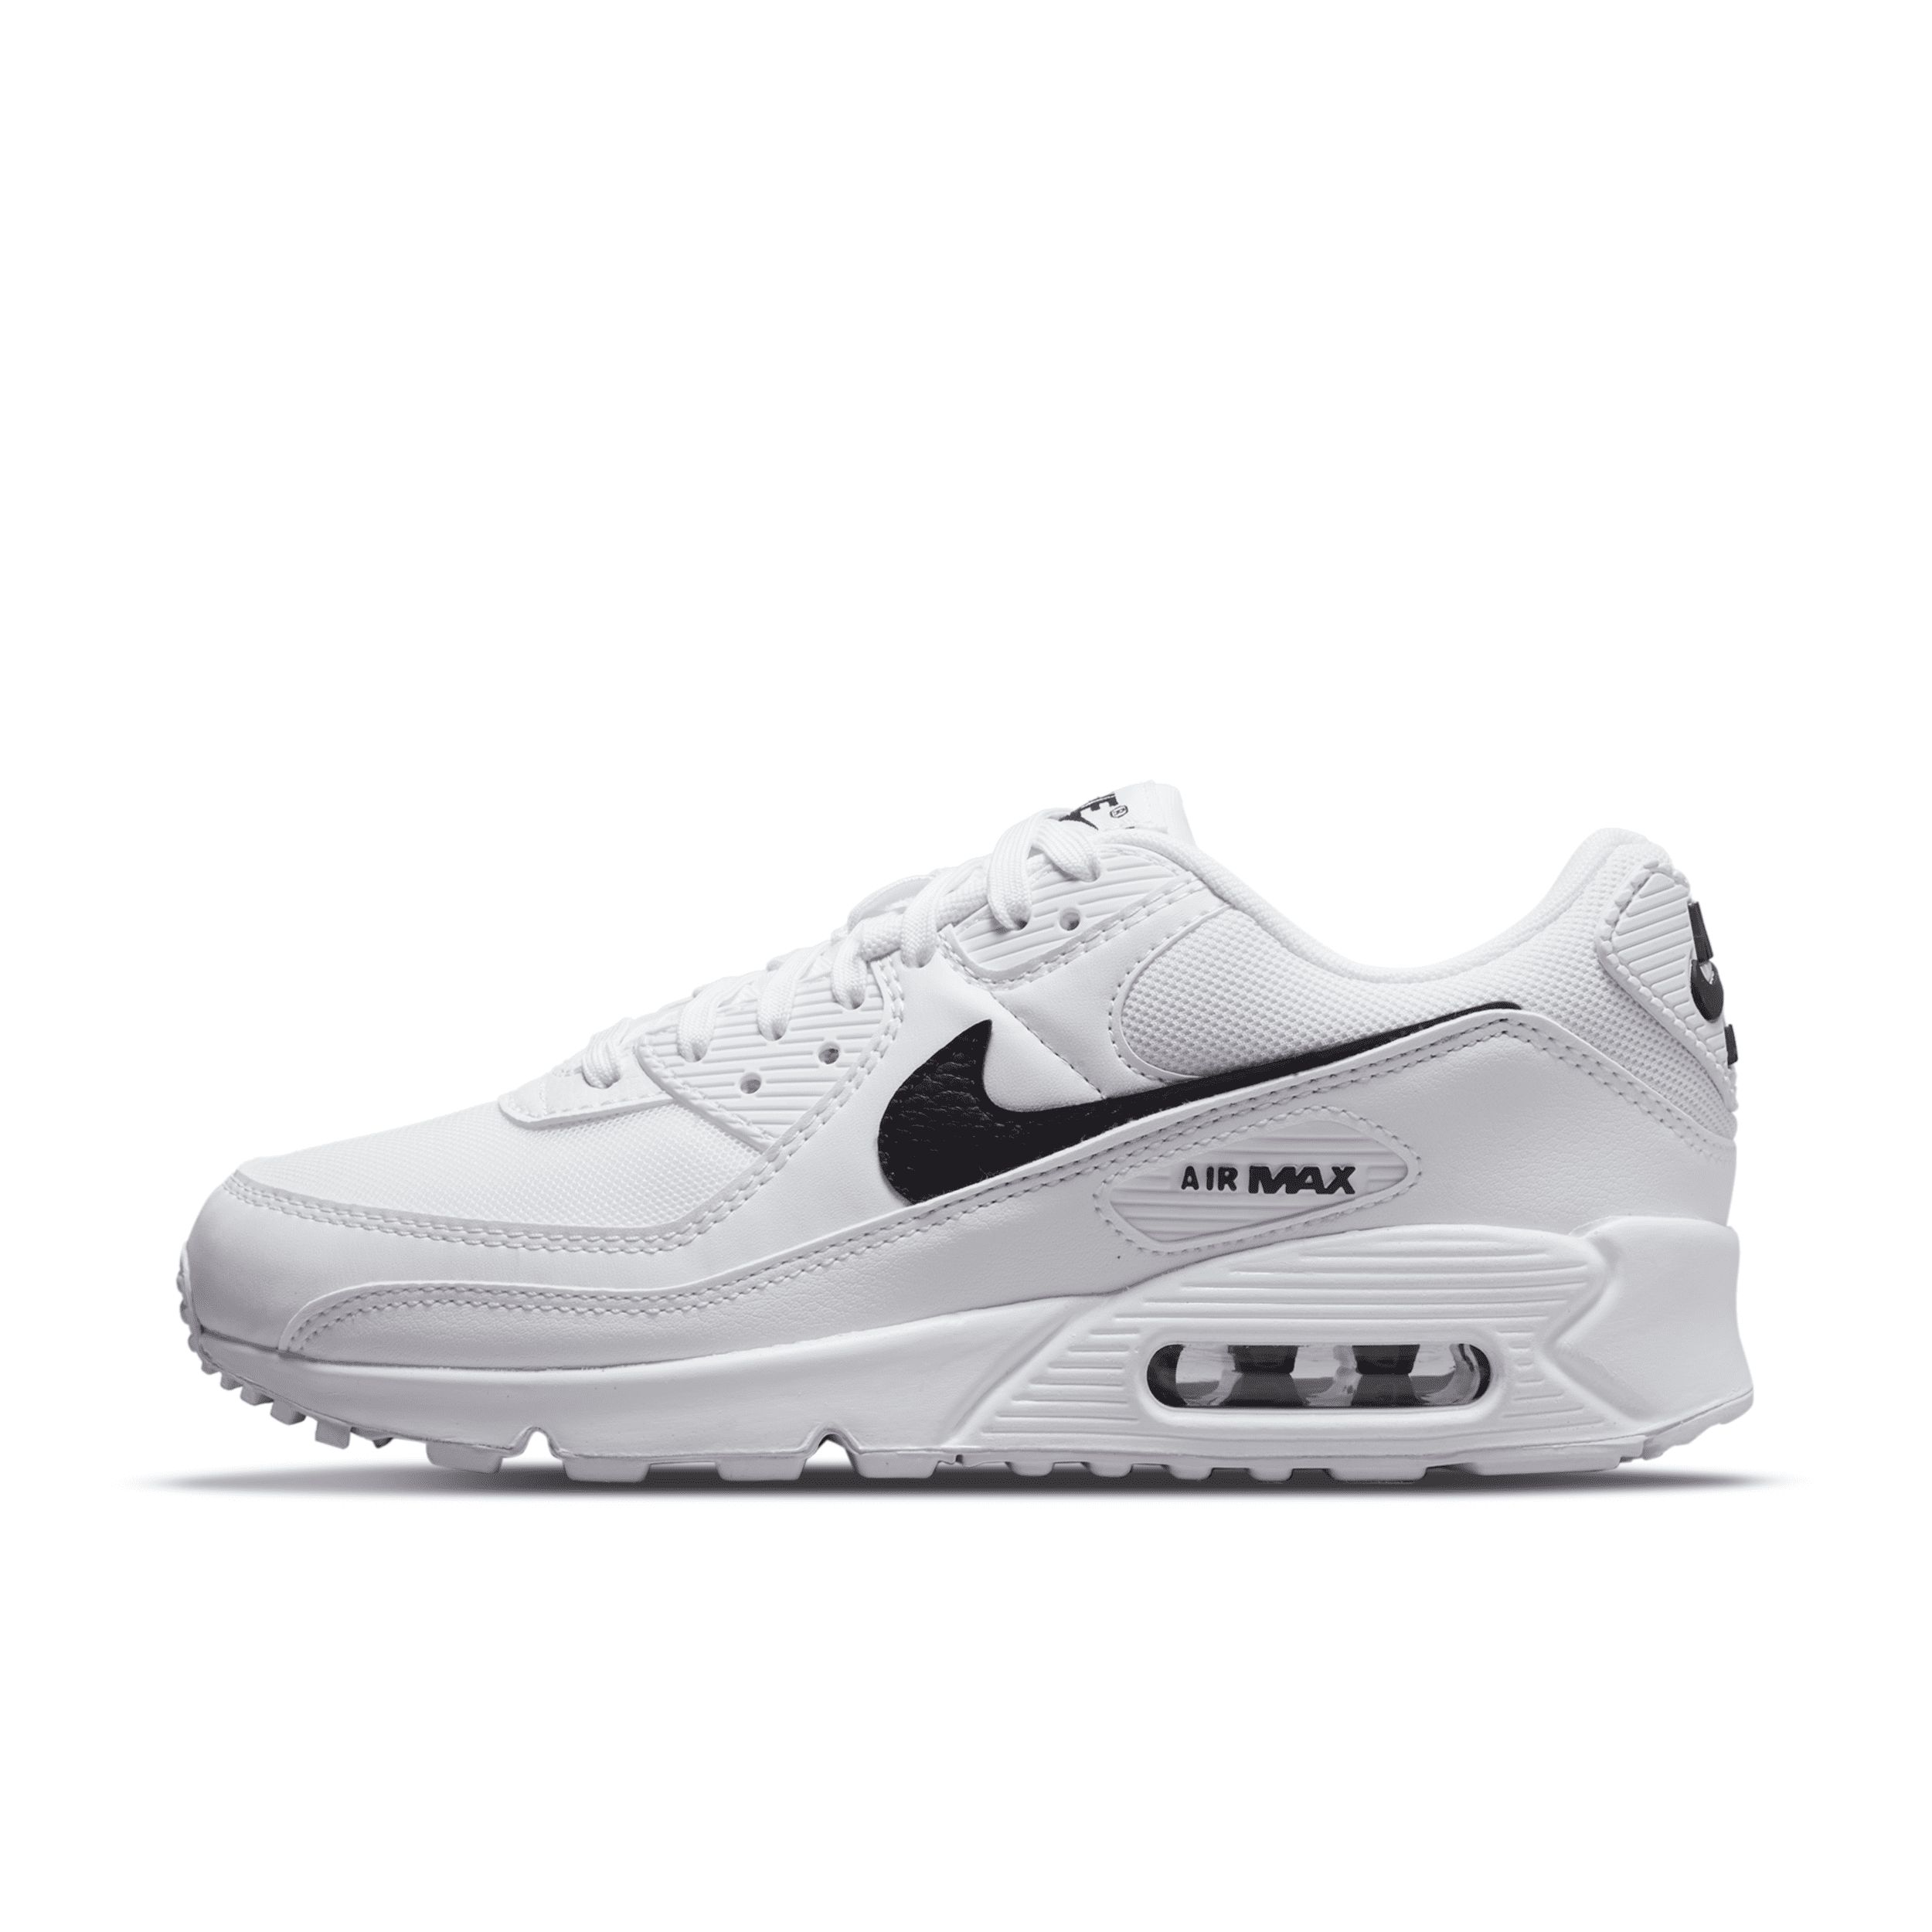 Nike Women's Air Max 90 Shoes in White, Size: 12 | DH8010-101 | Nike (US)